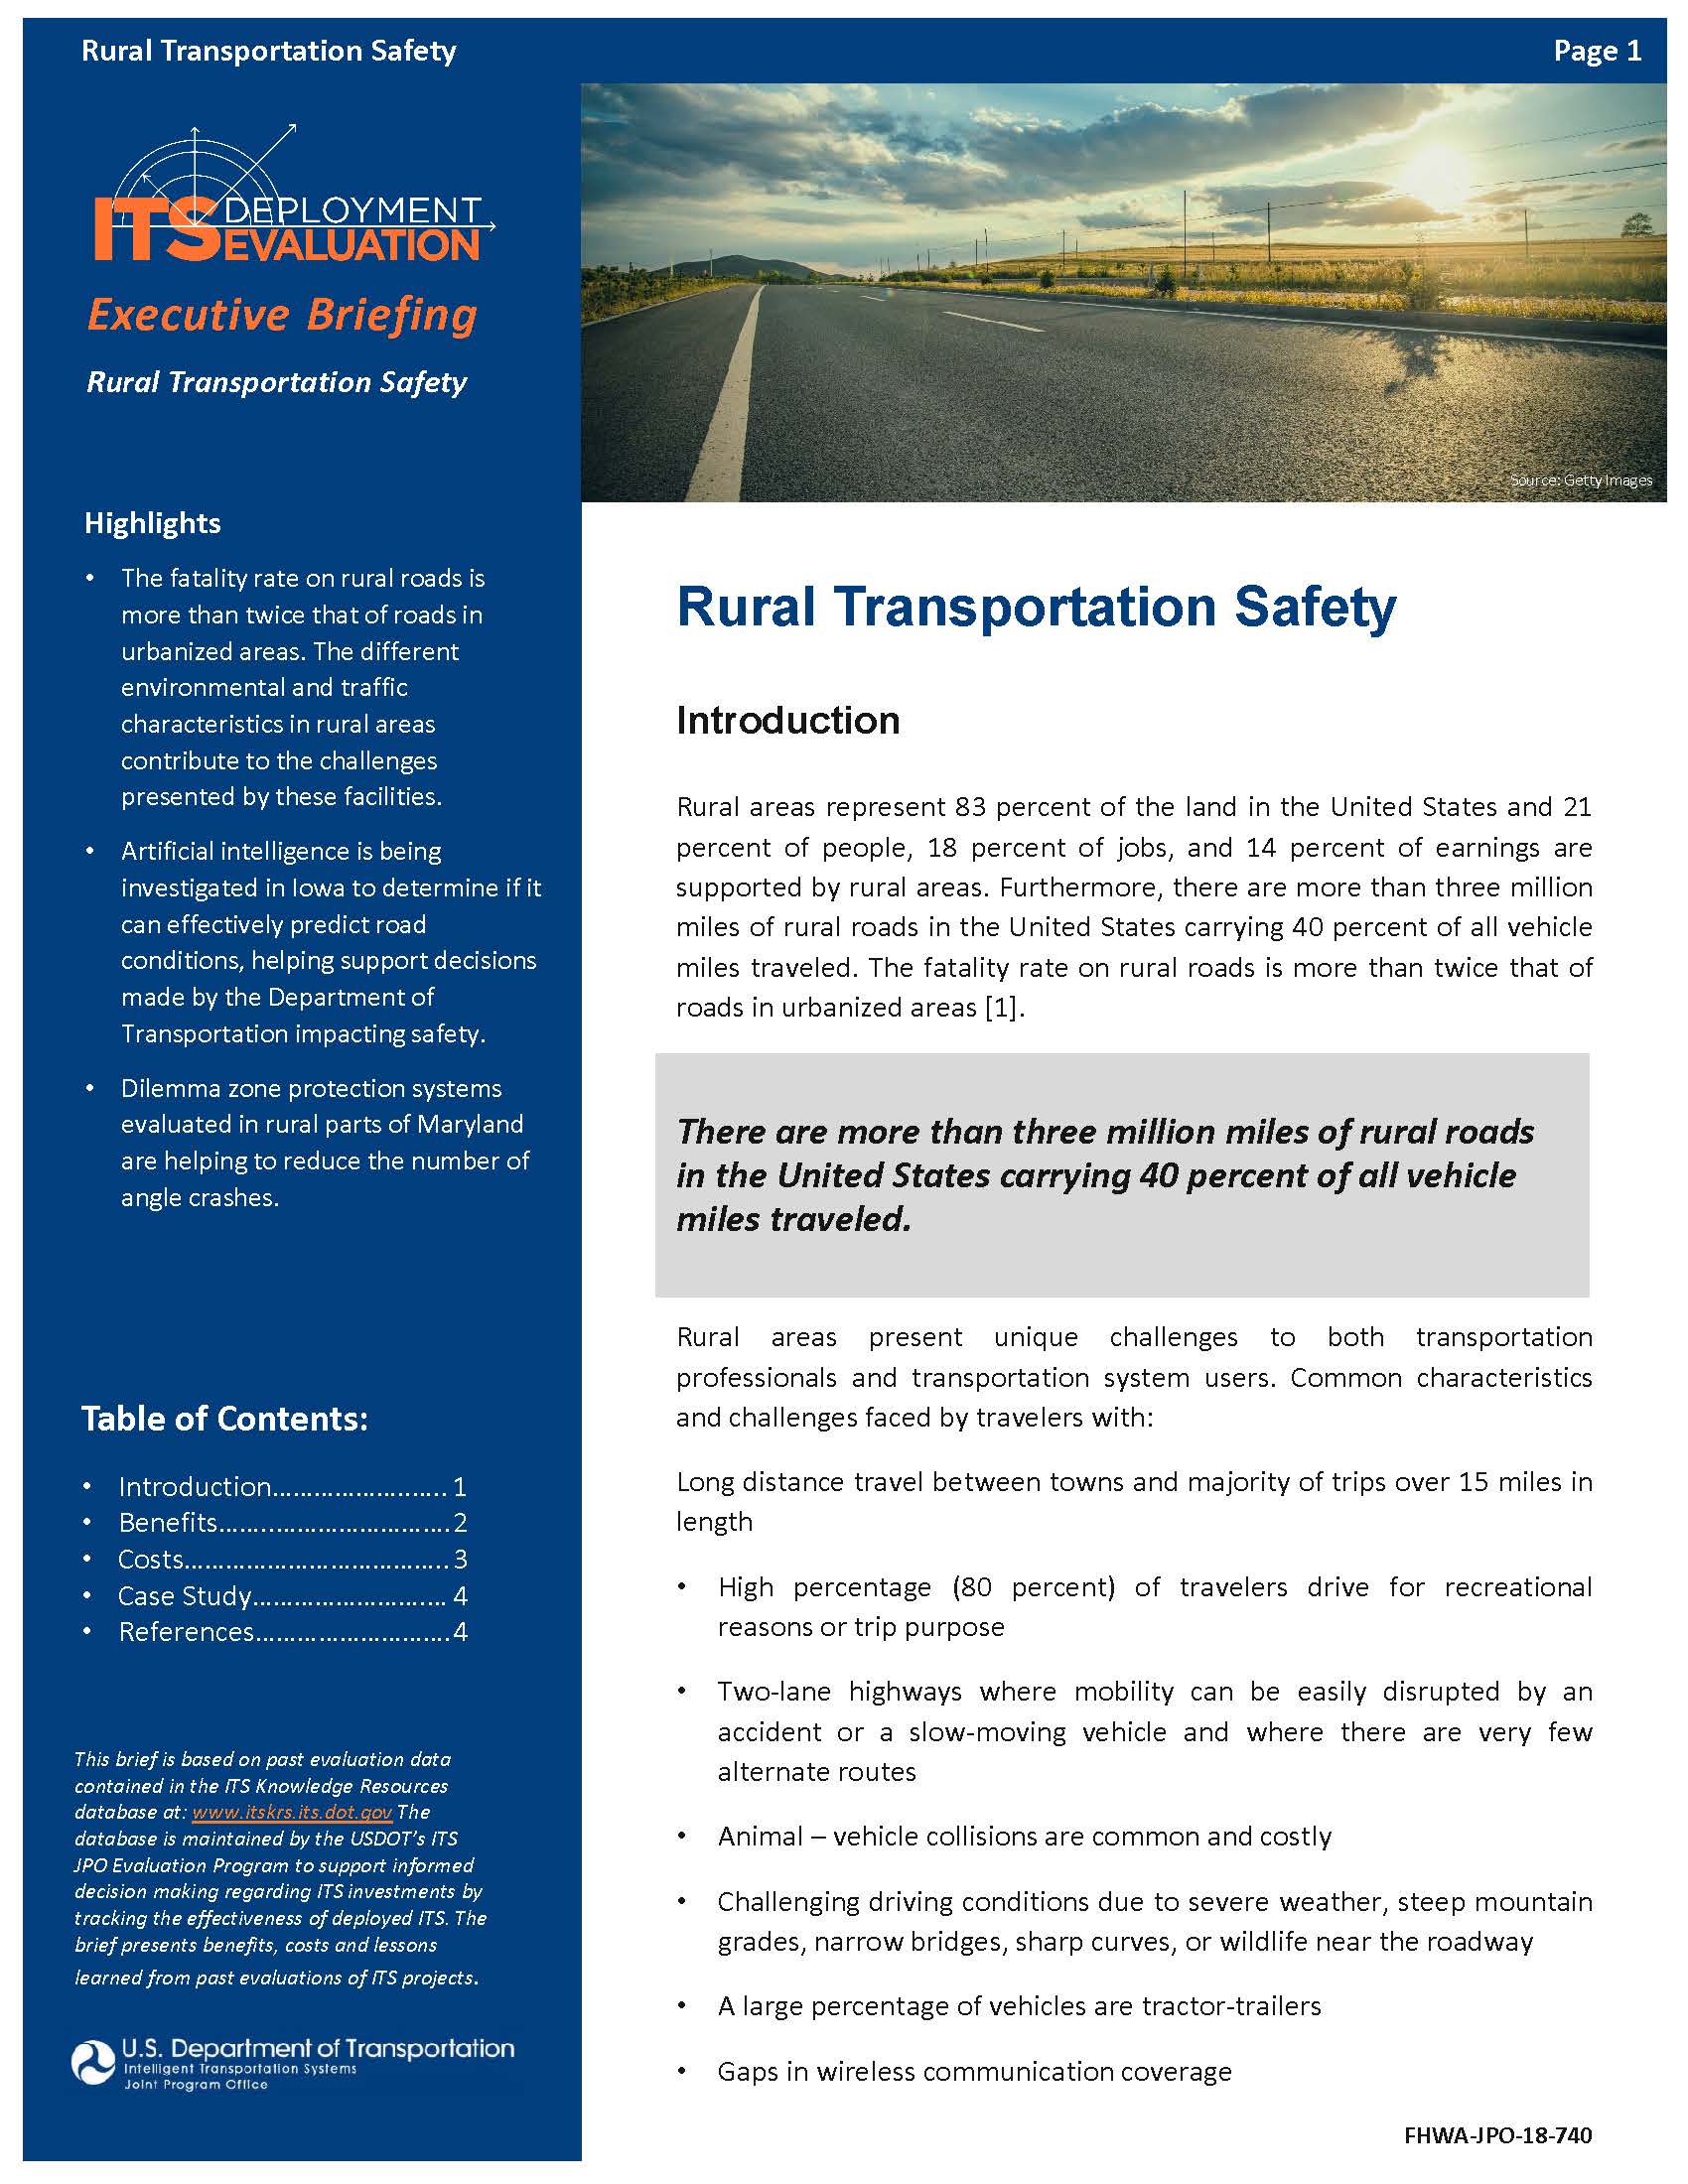 Cover Page of the Rural Transportation Safety Executive Briefing